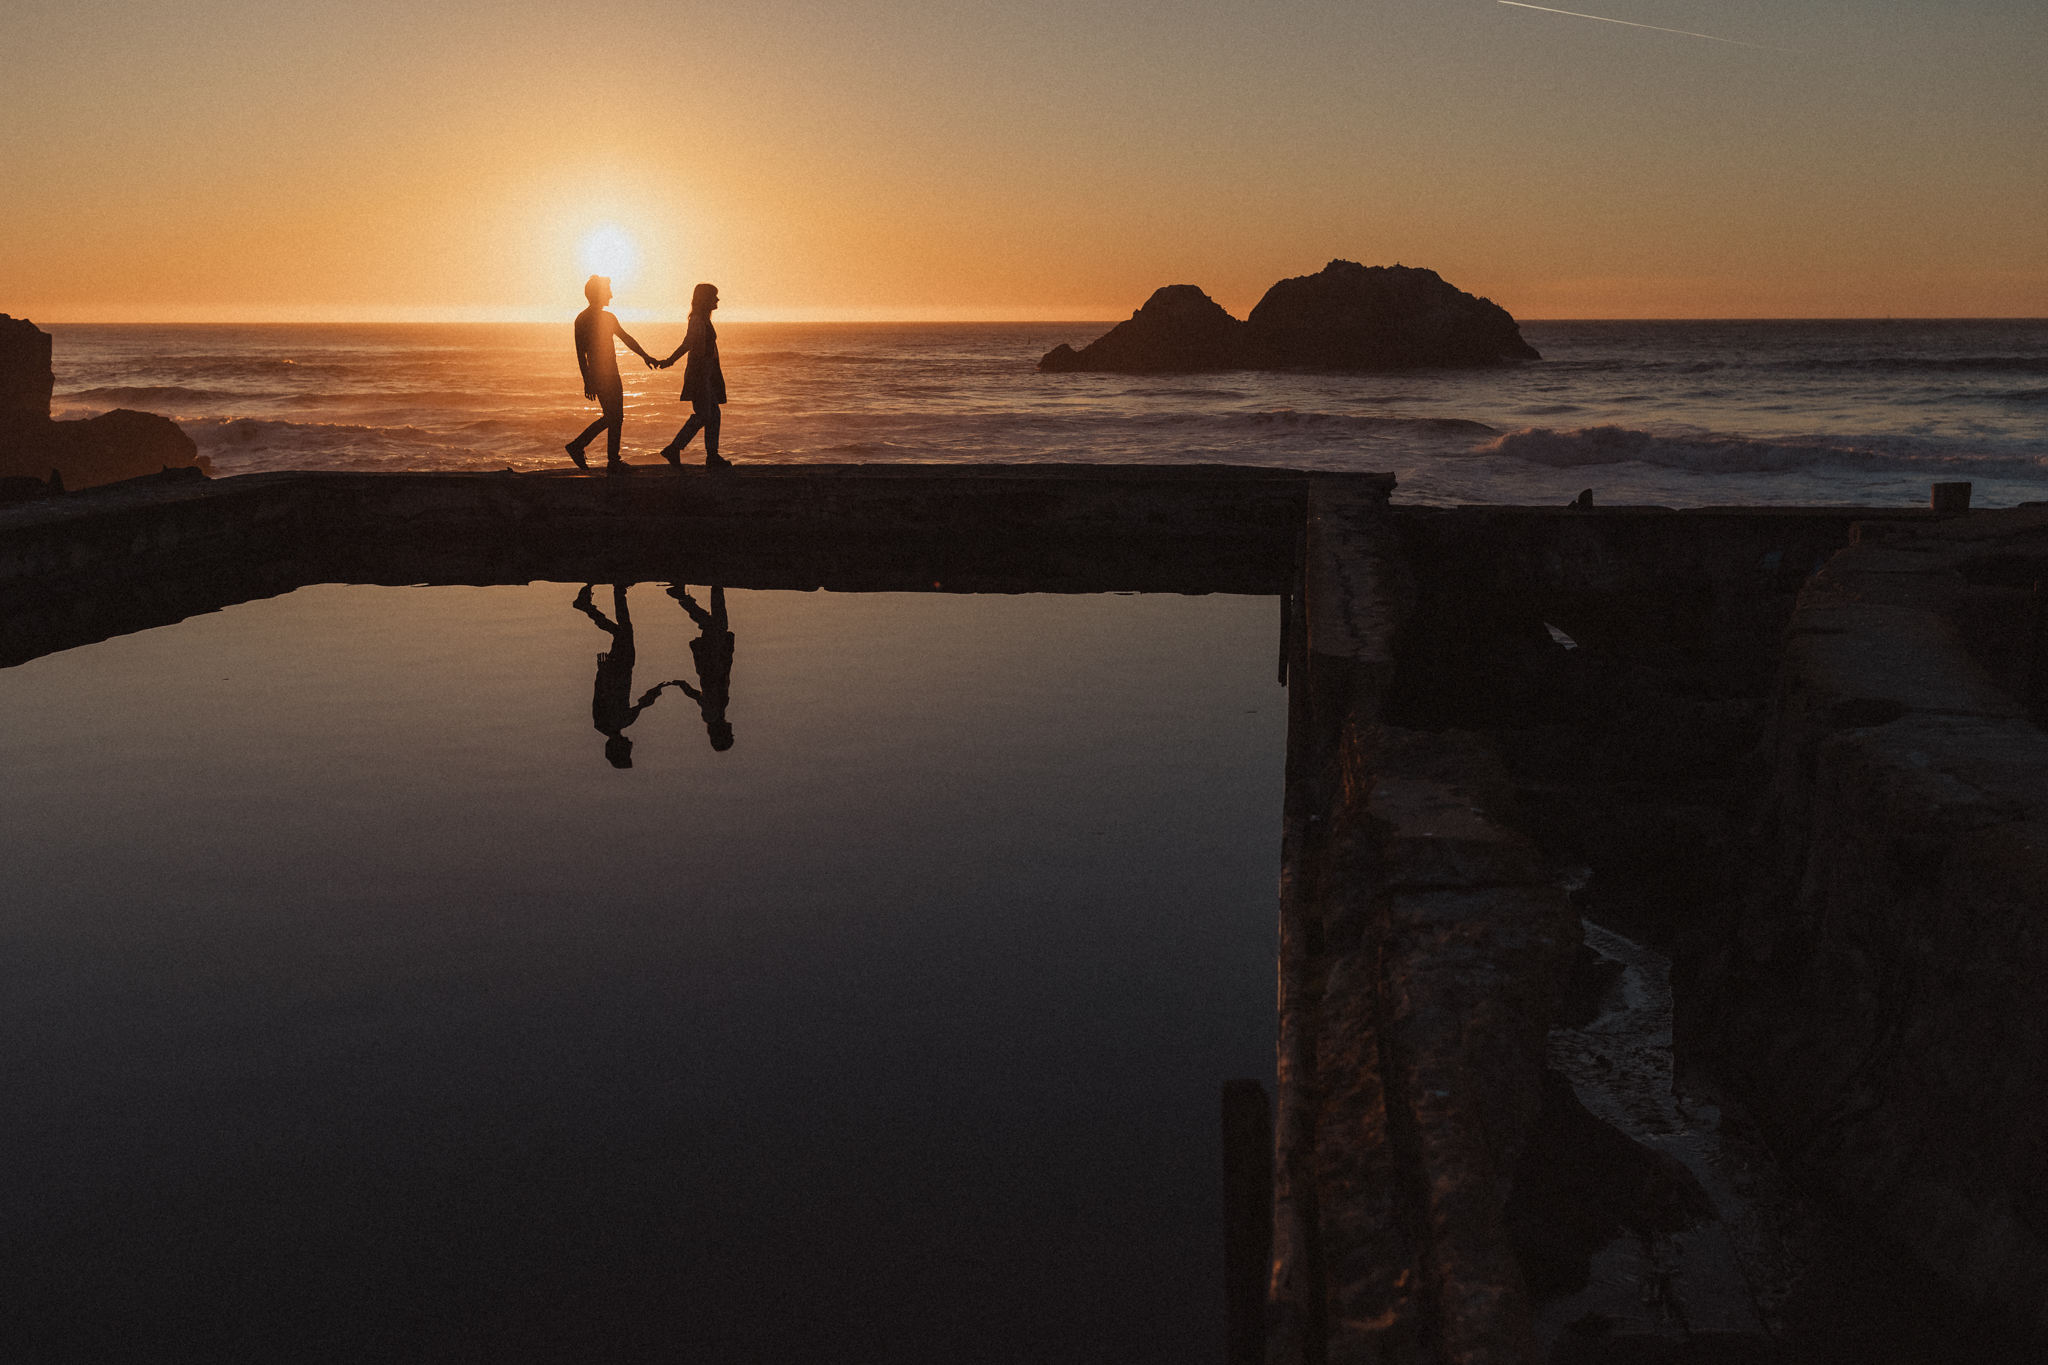 Boy and girl holding hands and walking across Sutro Baths at sunset for their engagement photo session in San Francisco.